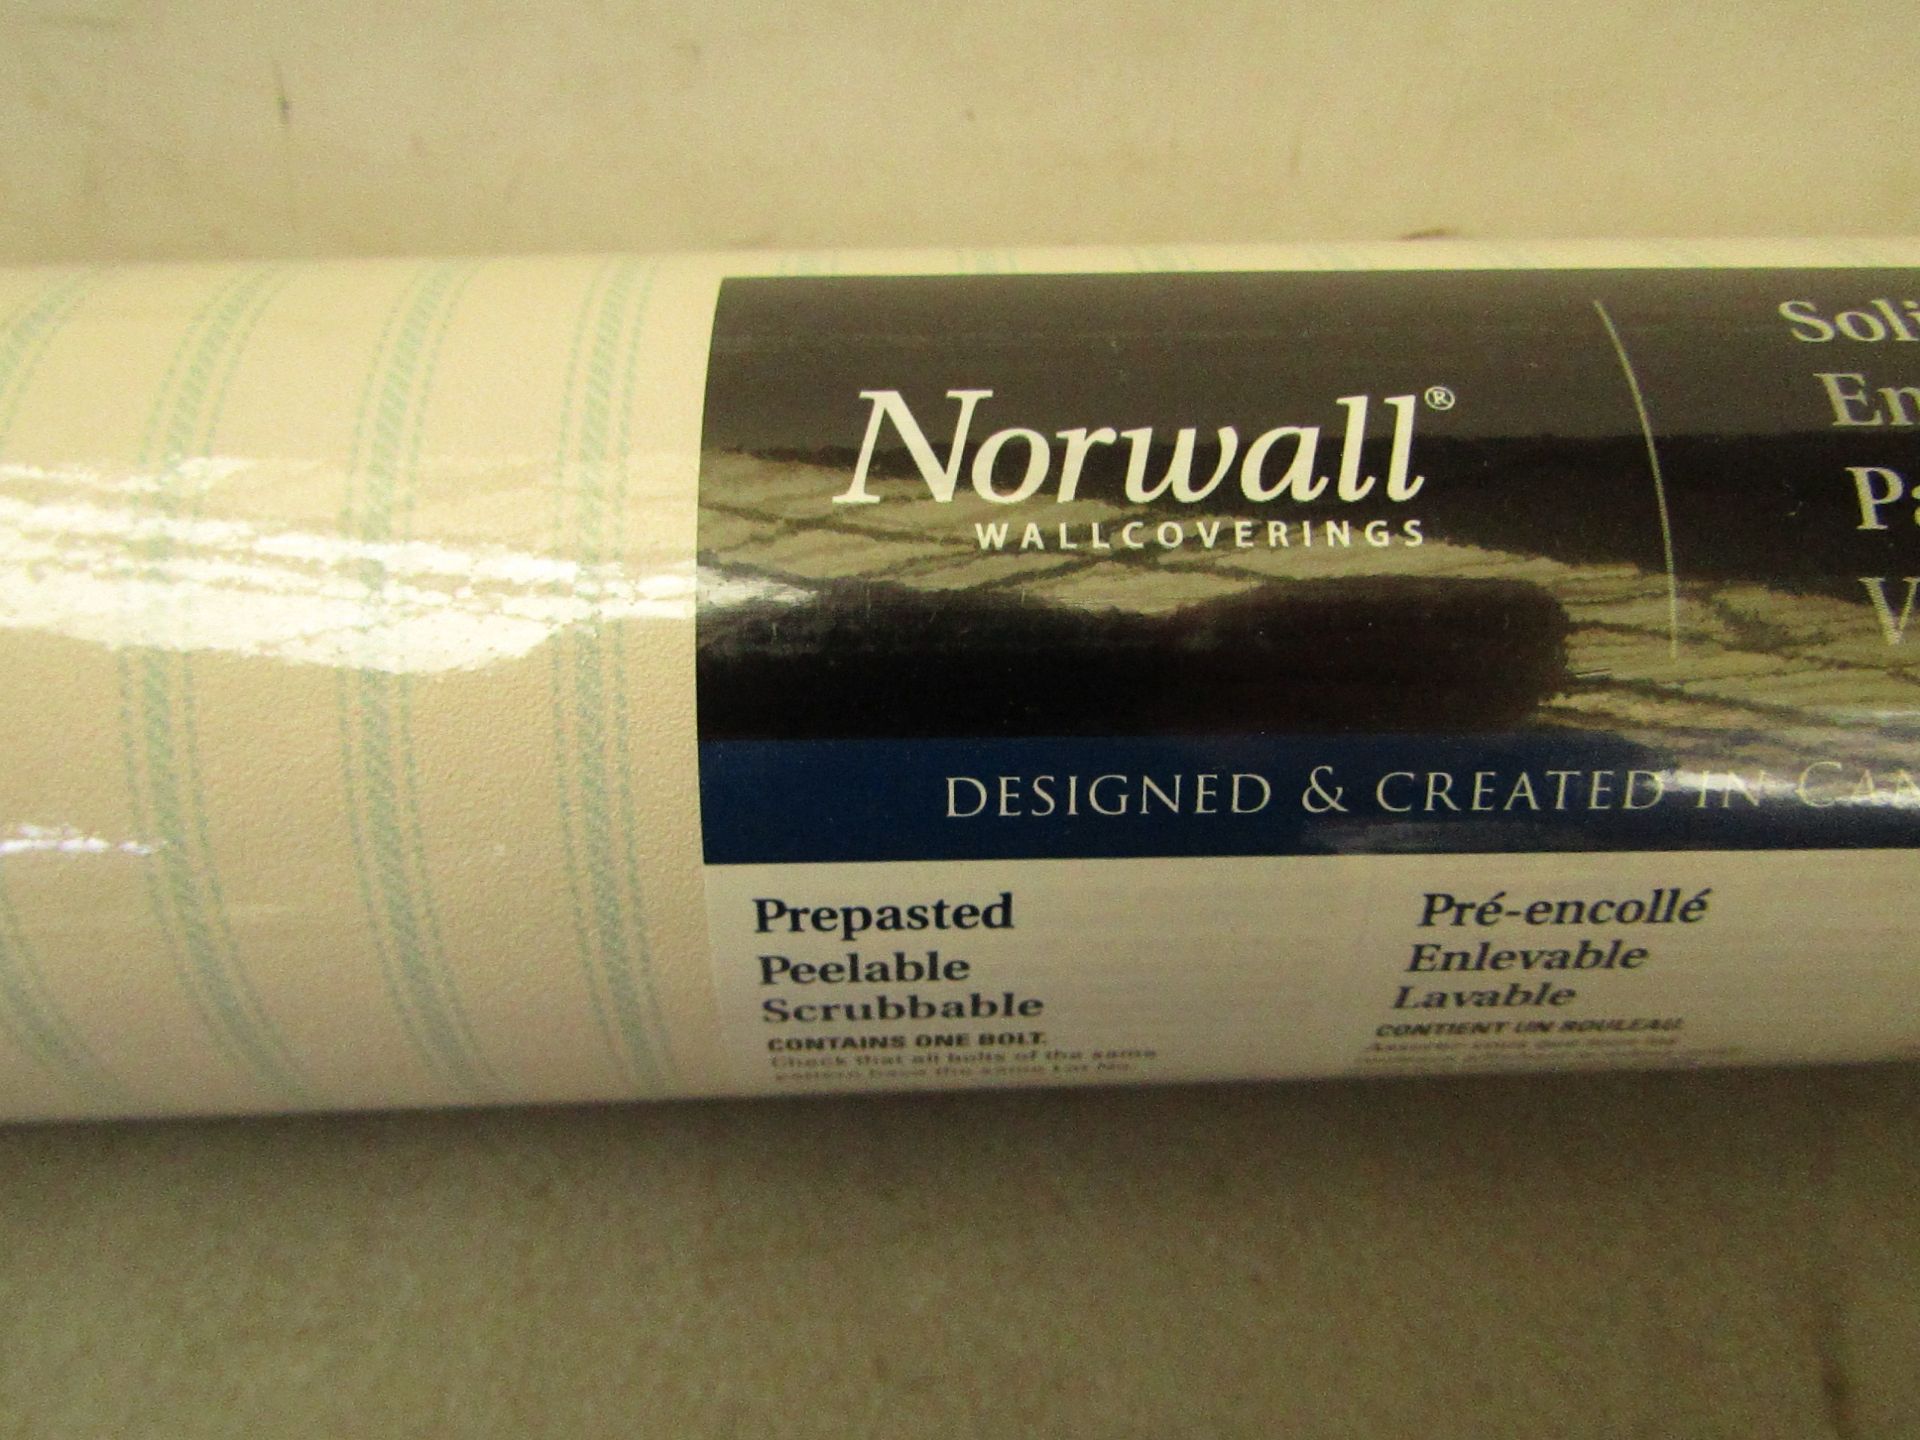 6 x Rolls of Norwall Pre pasted Wallpaper. Unused & Packaged. See Image for design